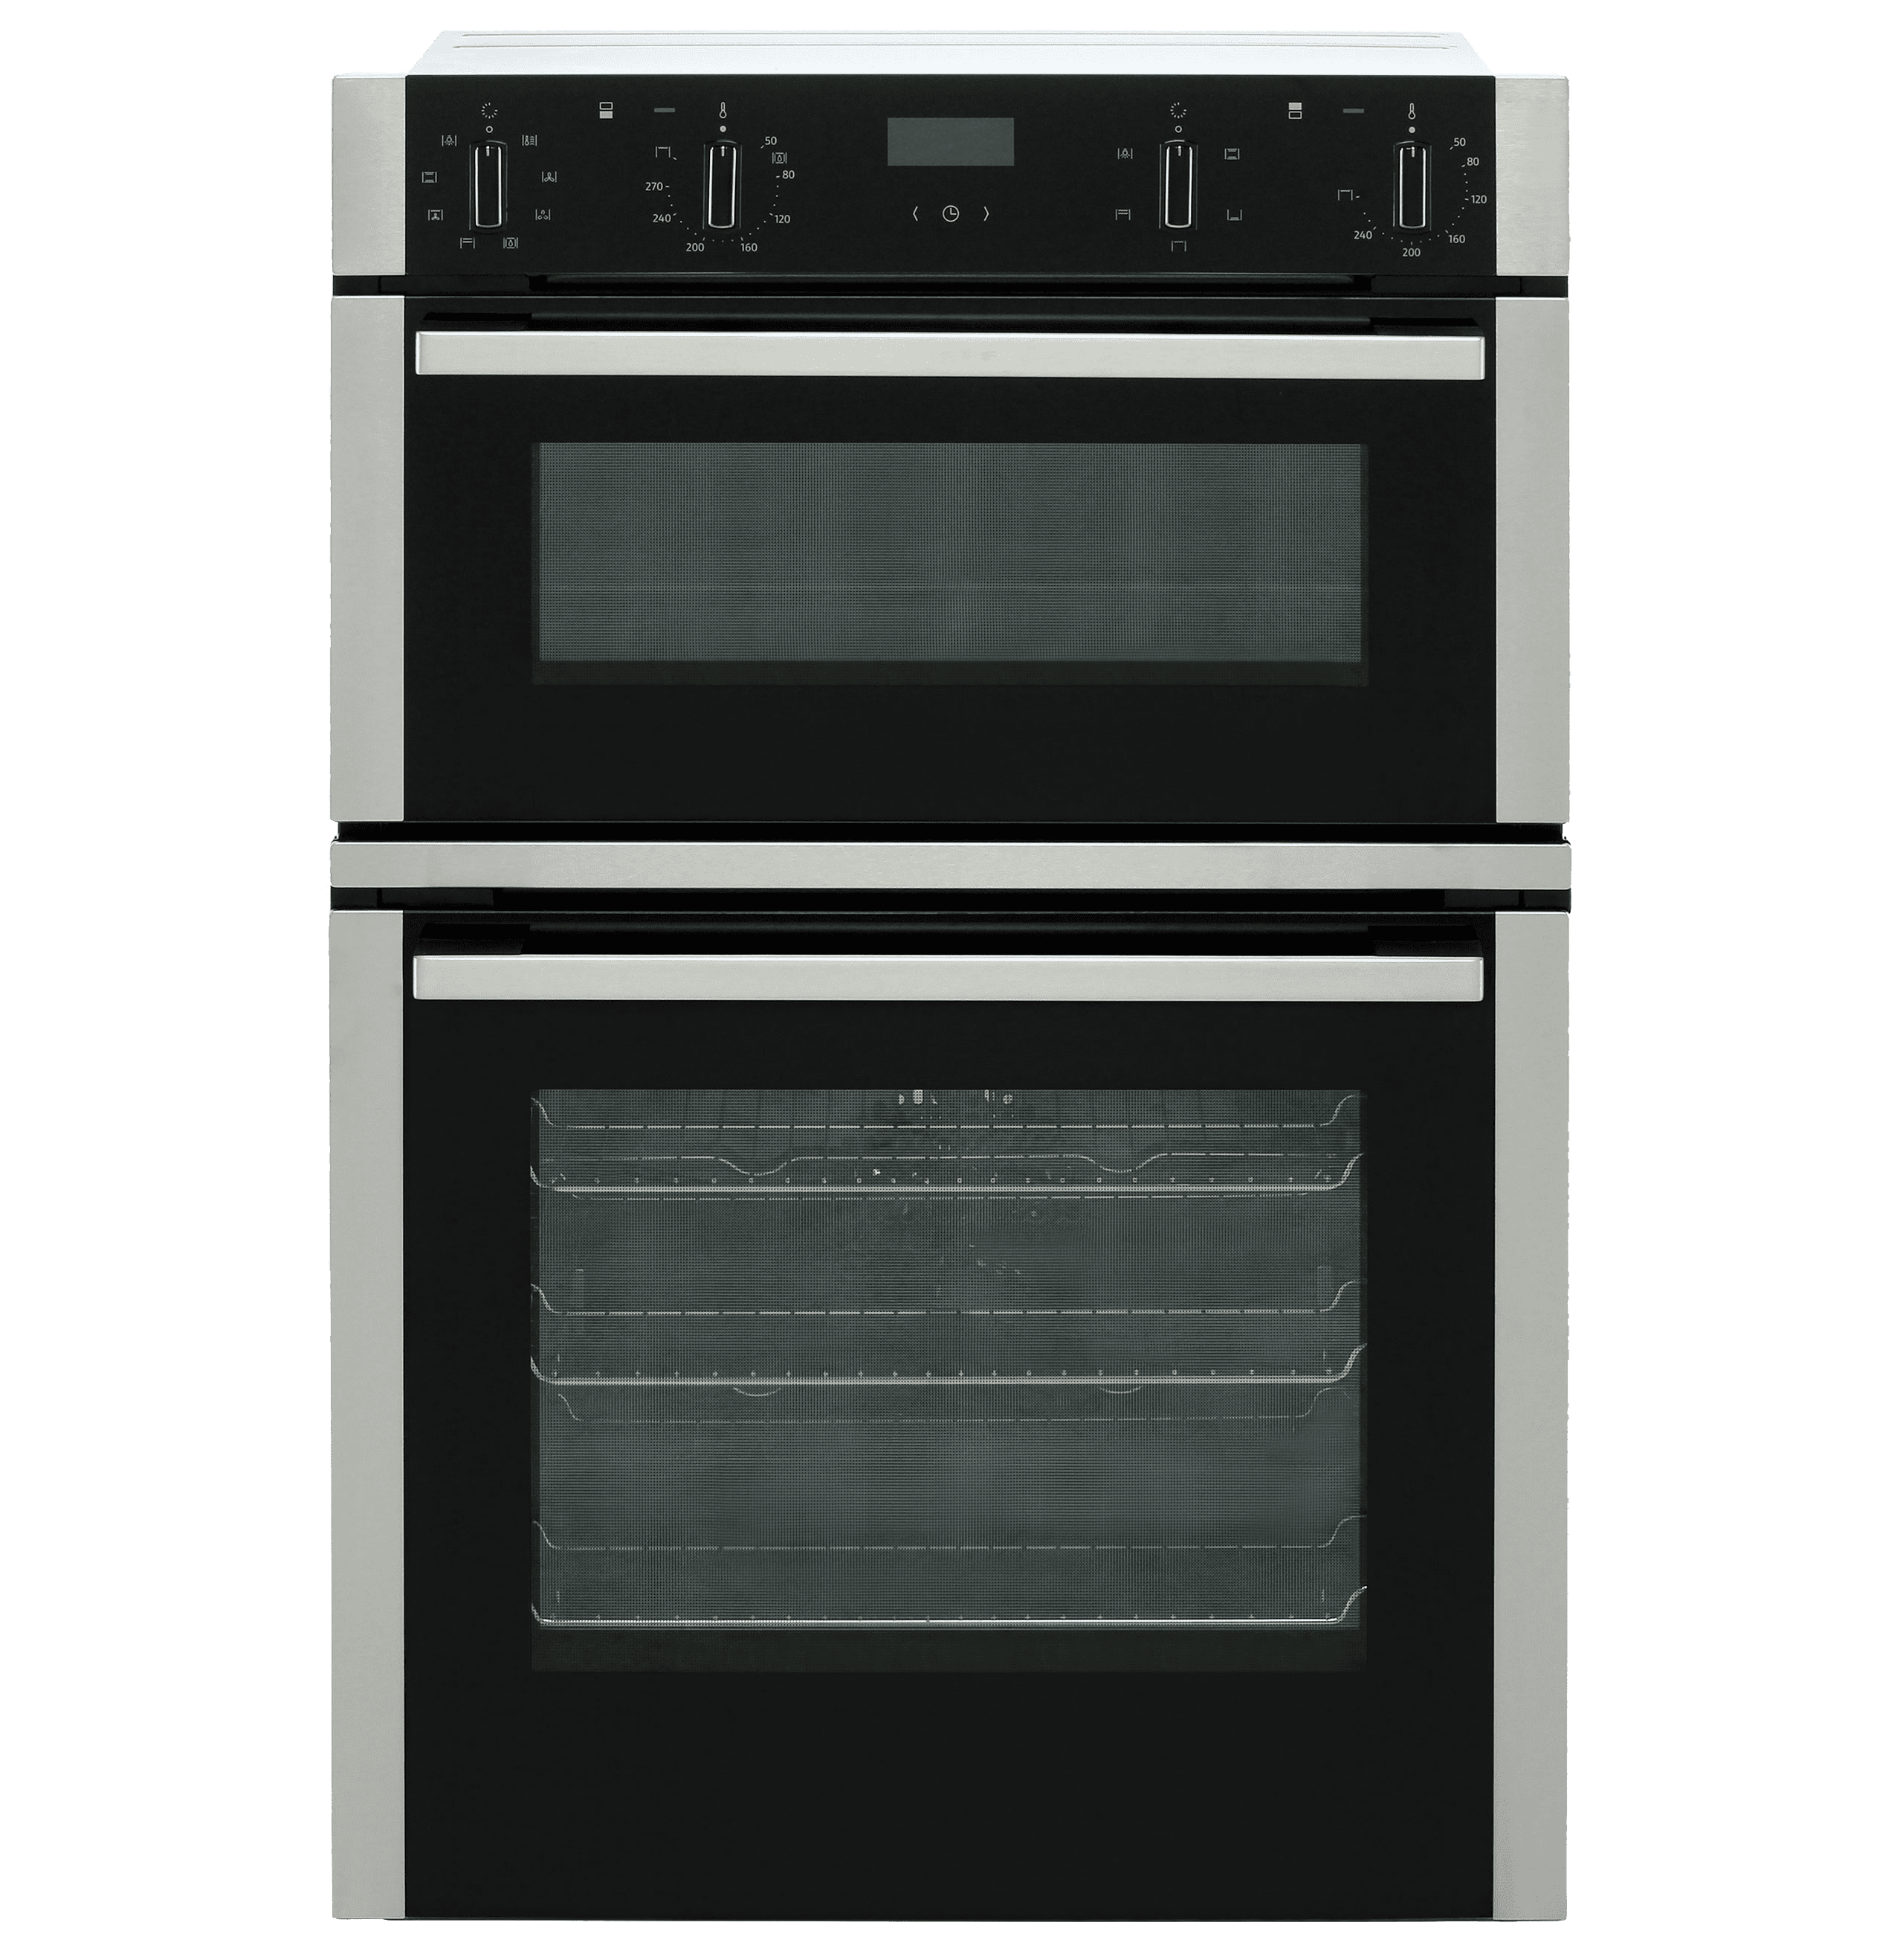 NEFF N50 U1ACE2HN0B Built In Electric Double Oven - Stainless Steel - A/B Rated, Stainless Steel